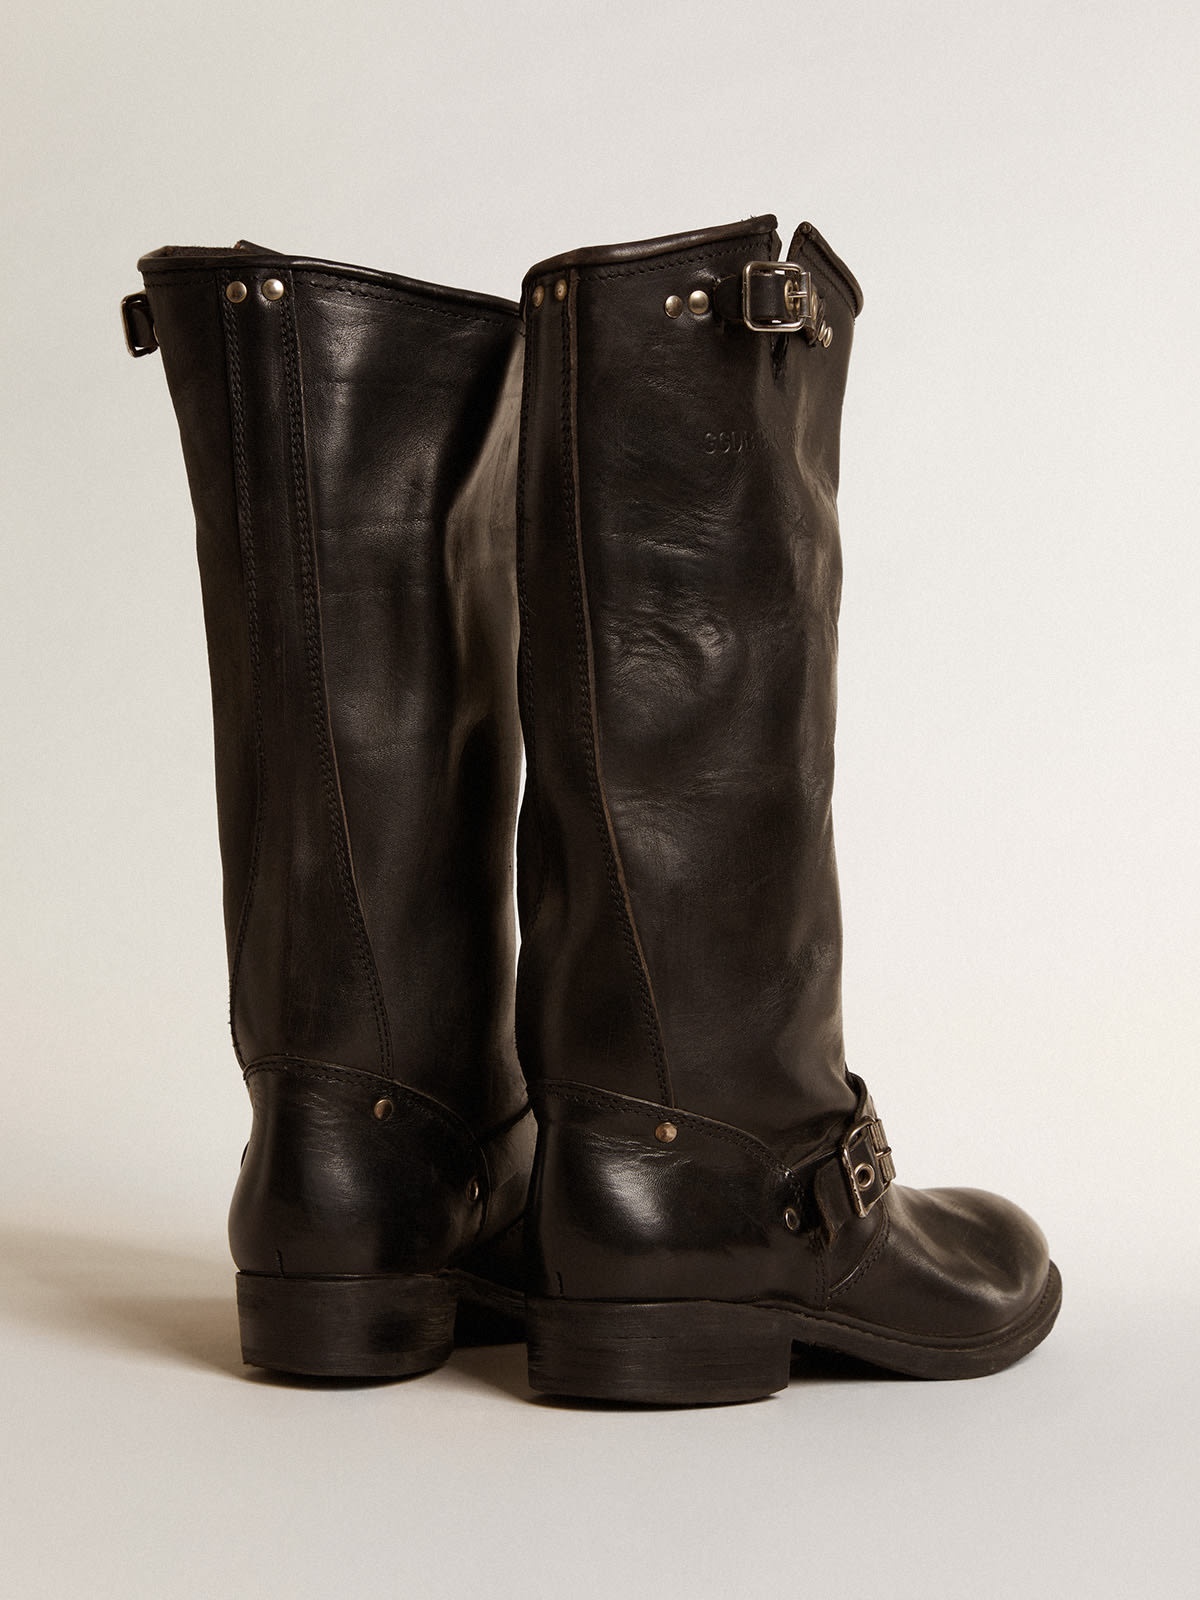 High Biker boots in black leather with silver studs and buckles - 4